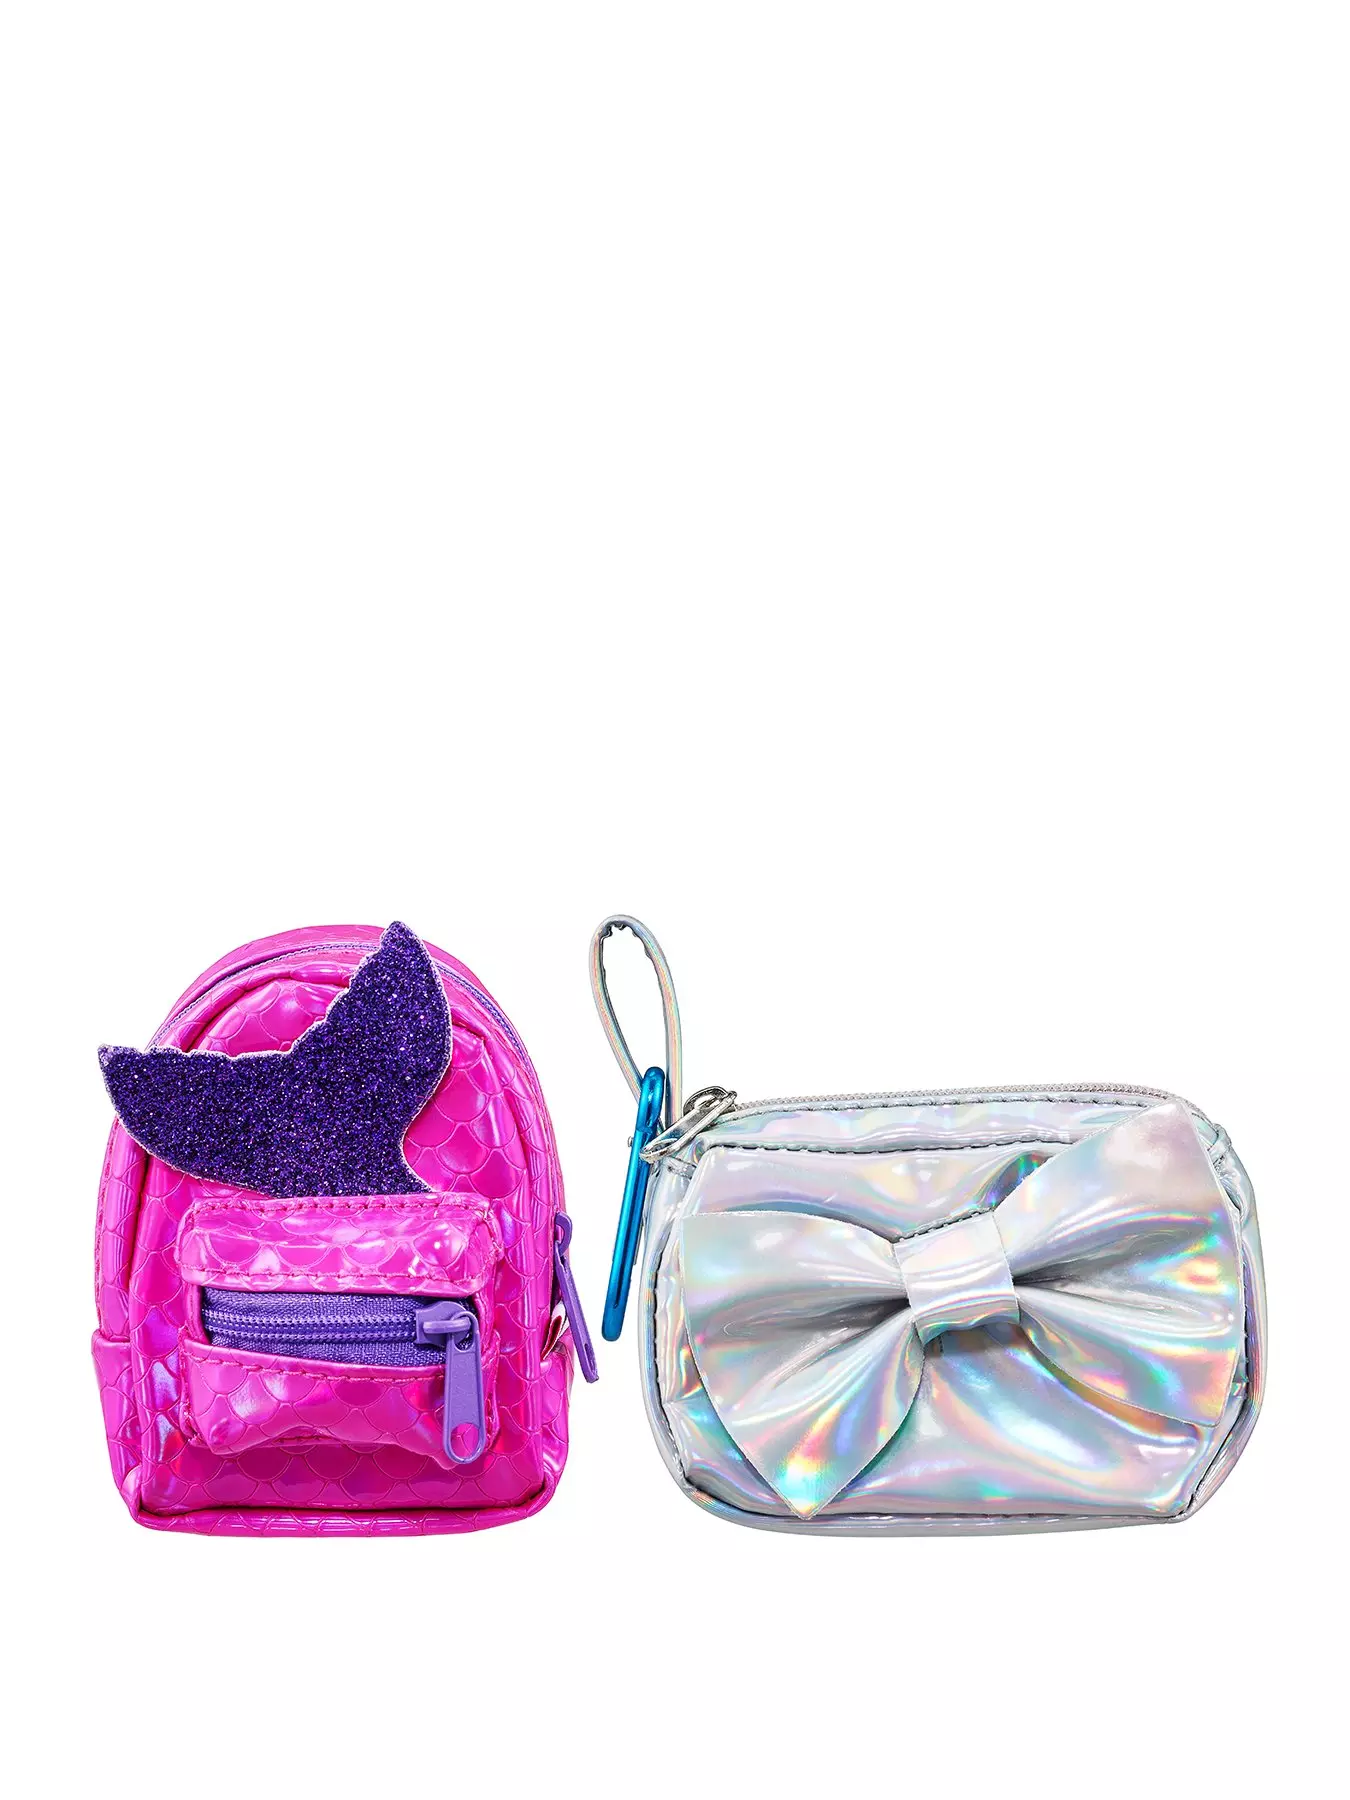  REAL LITTLES - Collectible Micro Handbag with 6 Beauty  Surprises Inside! : Toys & Games